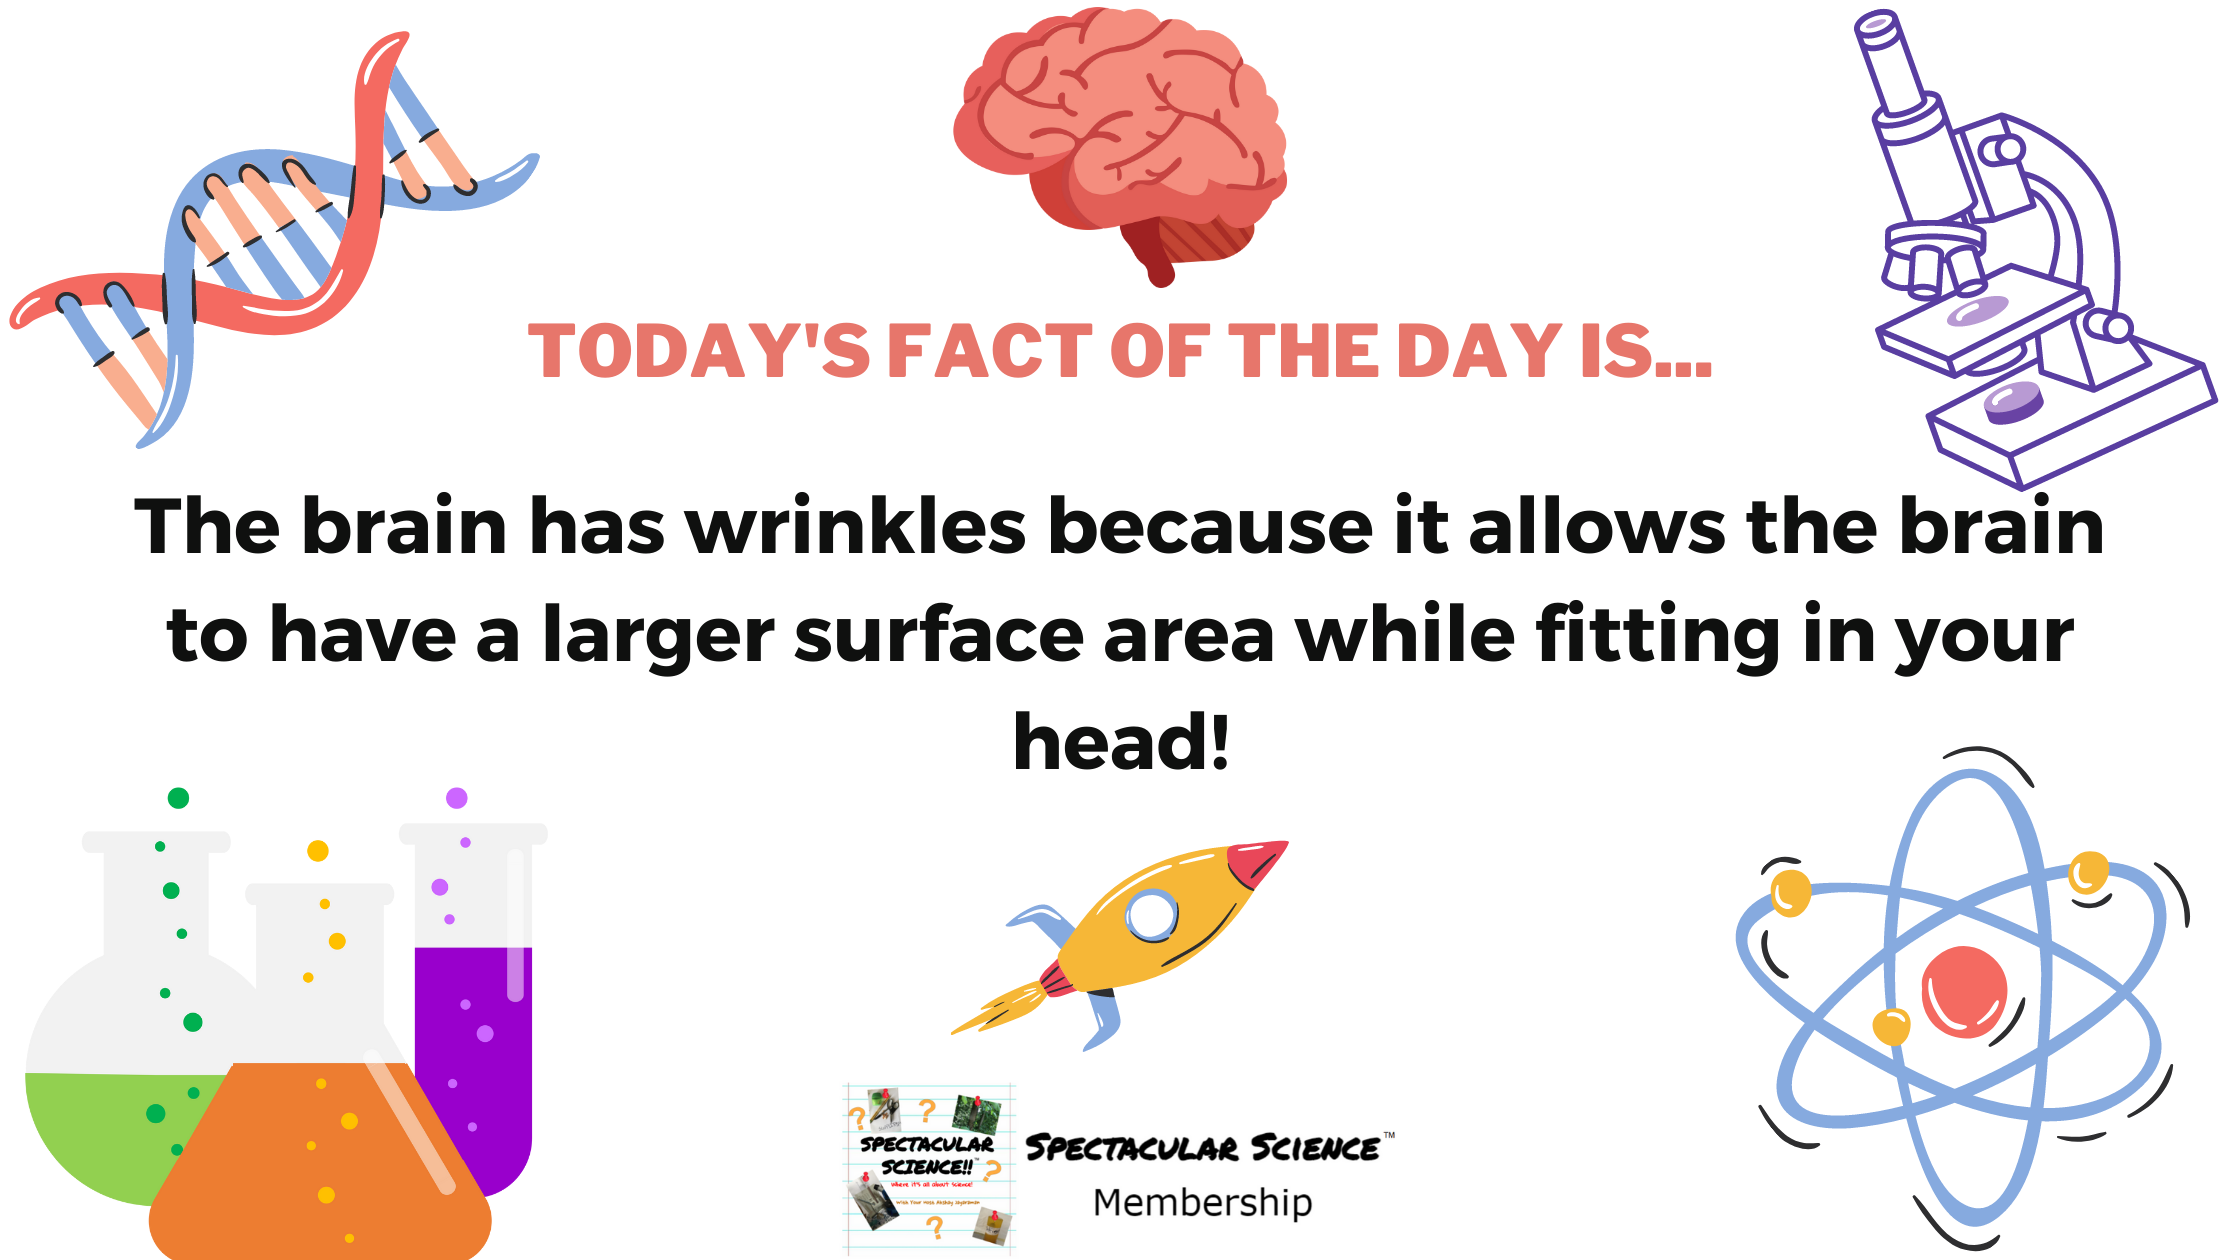 Fact of the Day Image June 2nd